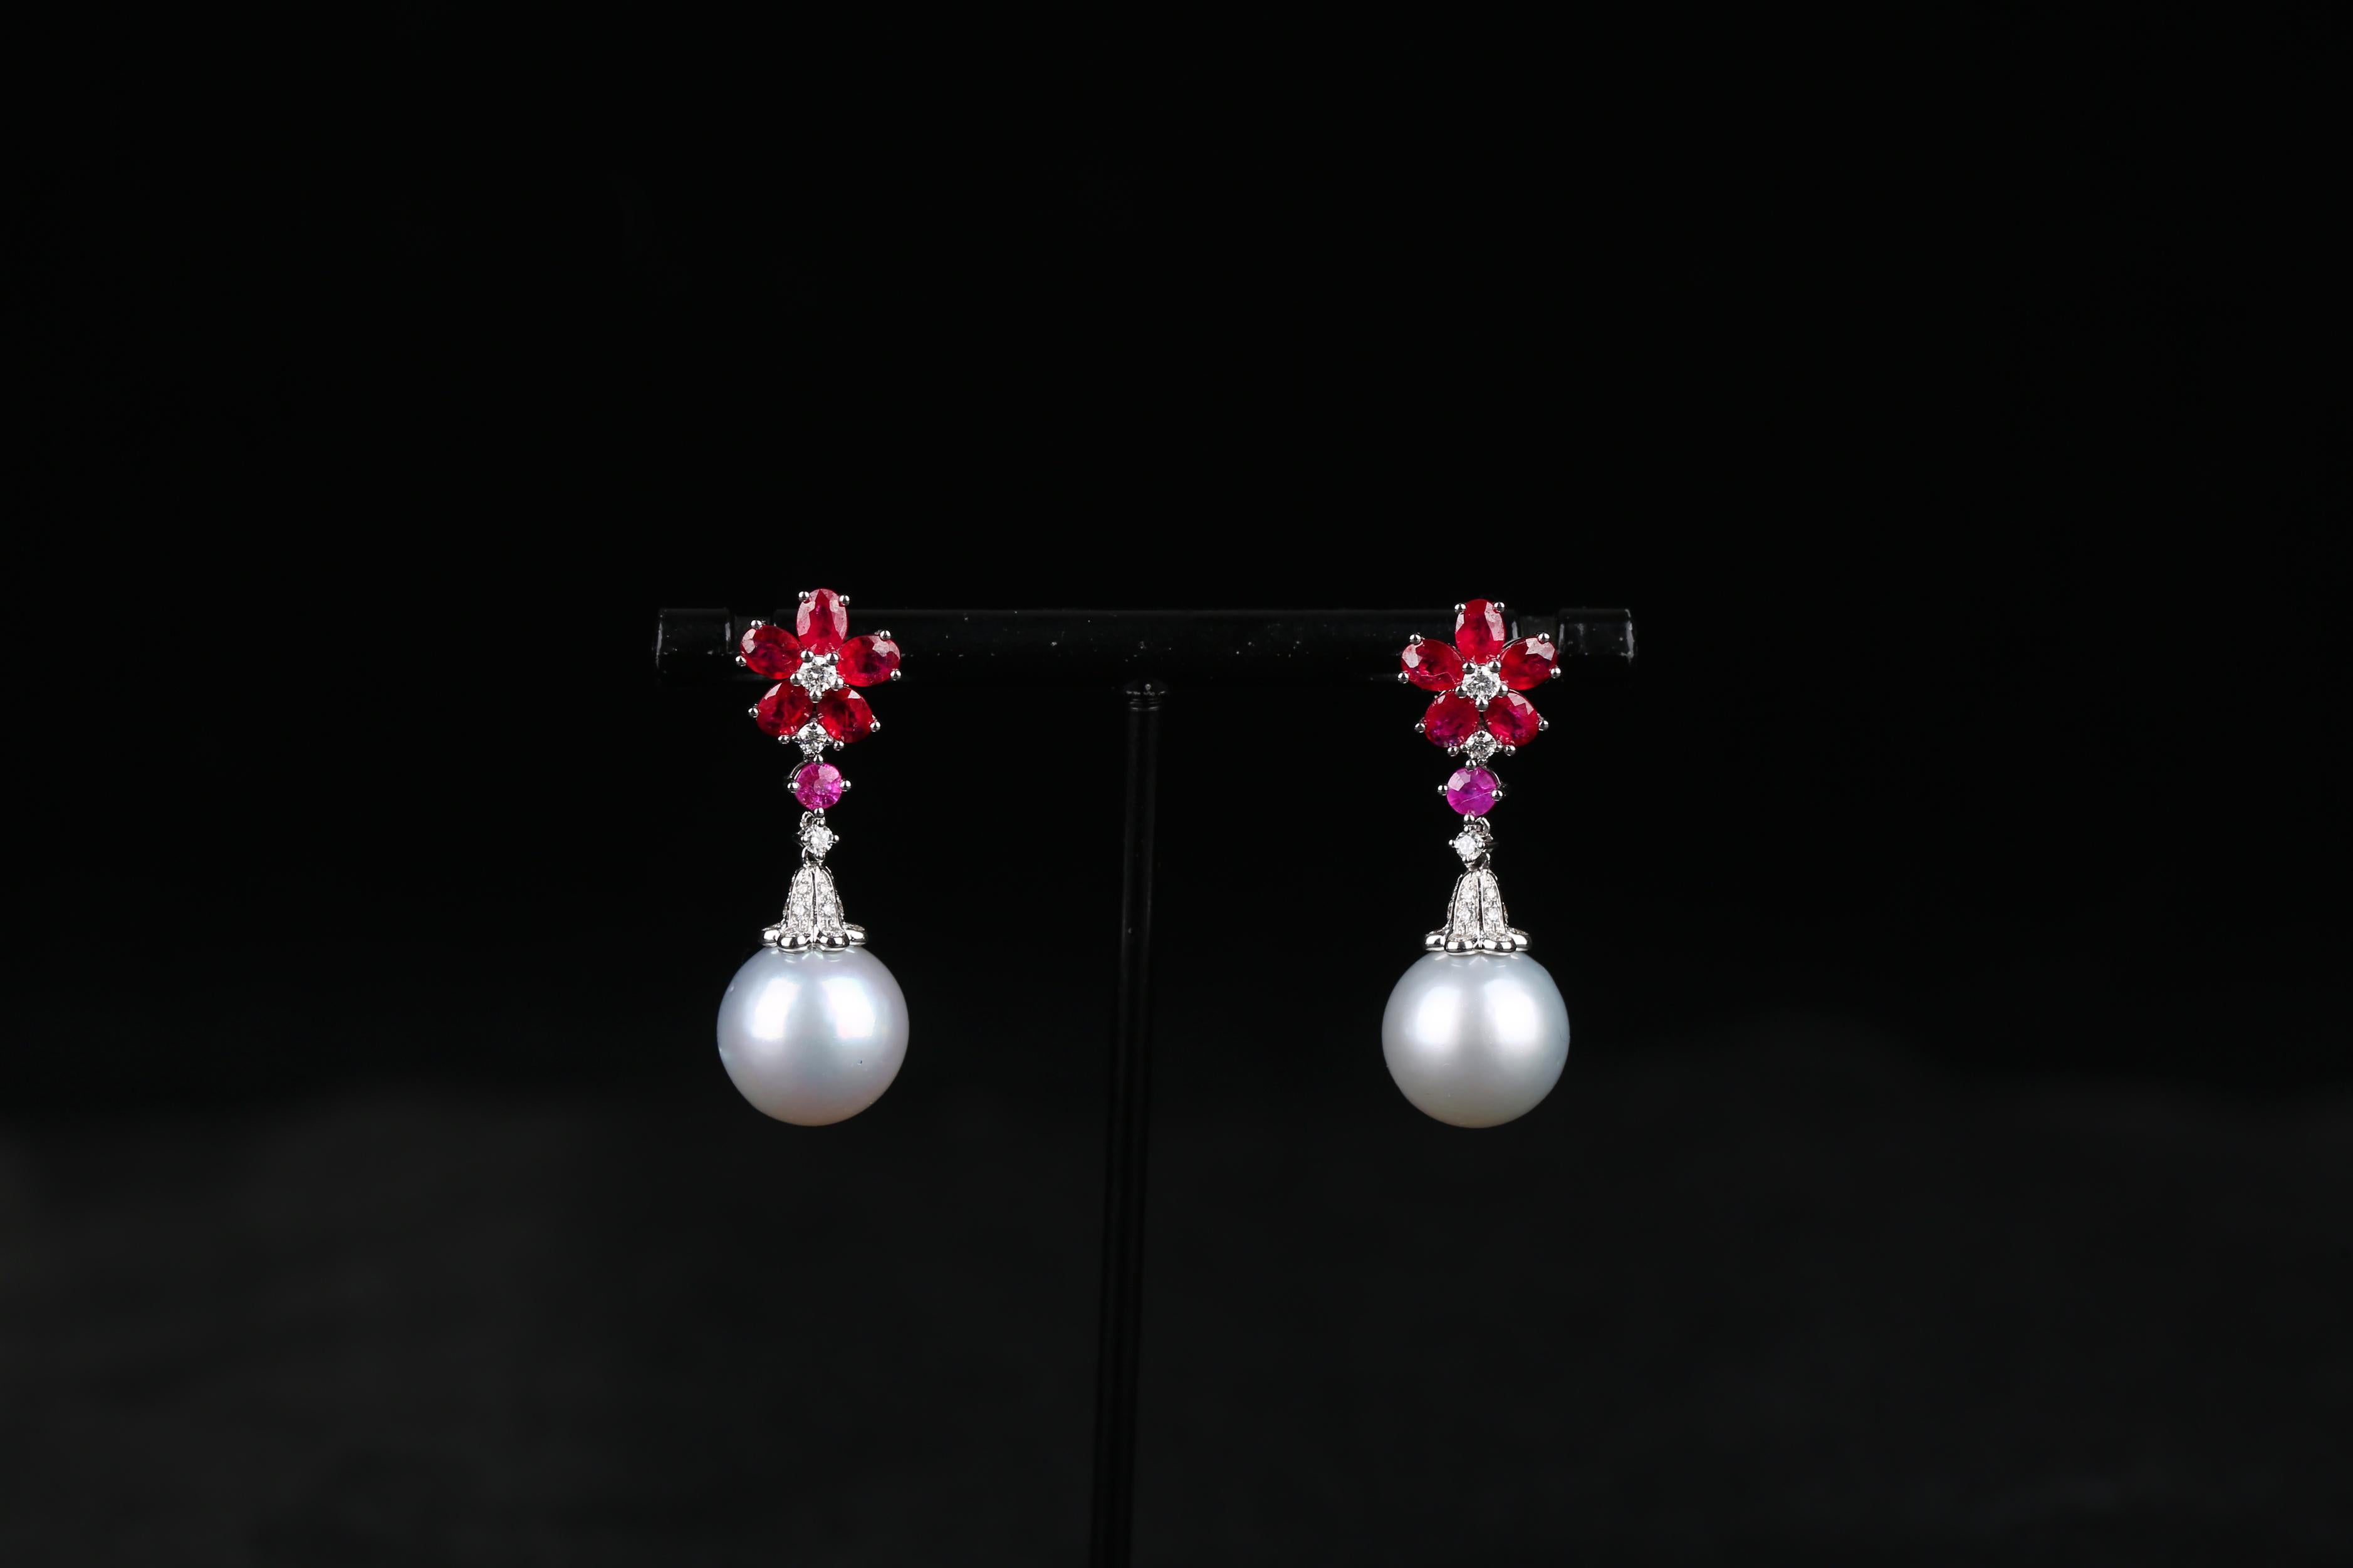 This is a pair of flower motif South Sea Pearl Earring. The flower petals are made of 5 oval rubies and a round diamond at the center of the flower. The White South Sea Pearl is then suspended below the Pink Sapphire and Diamond Bale. It is a simple